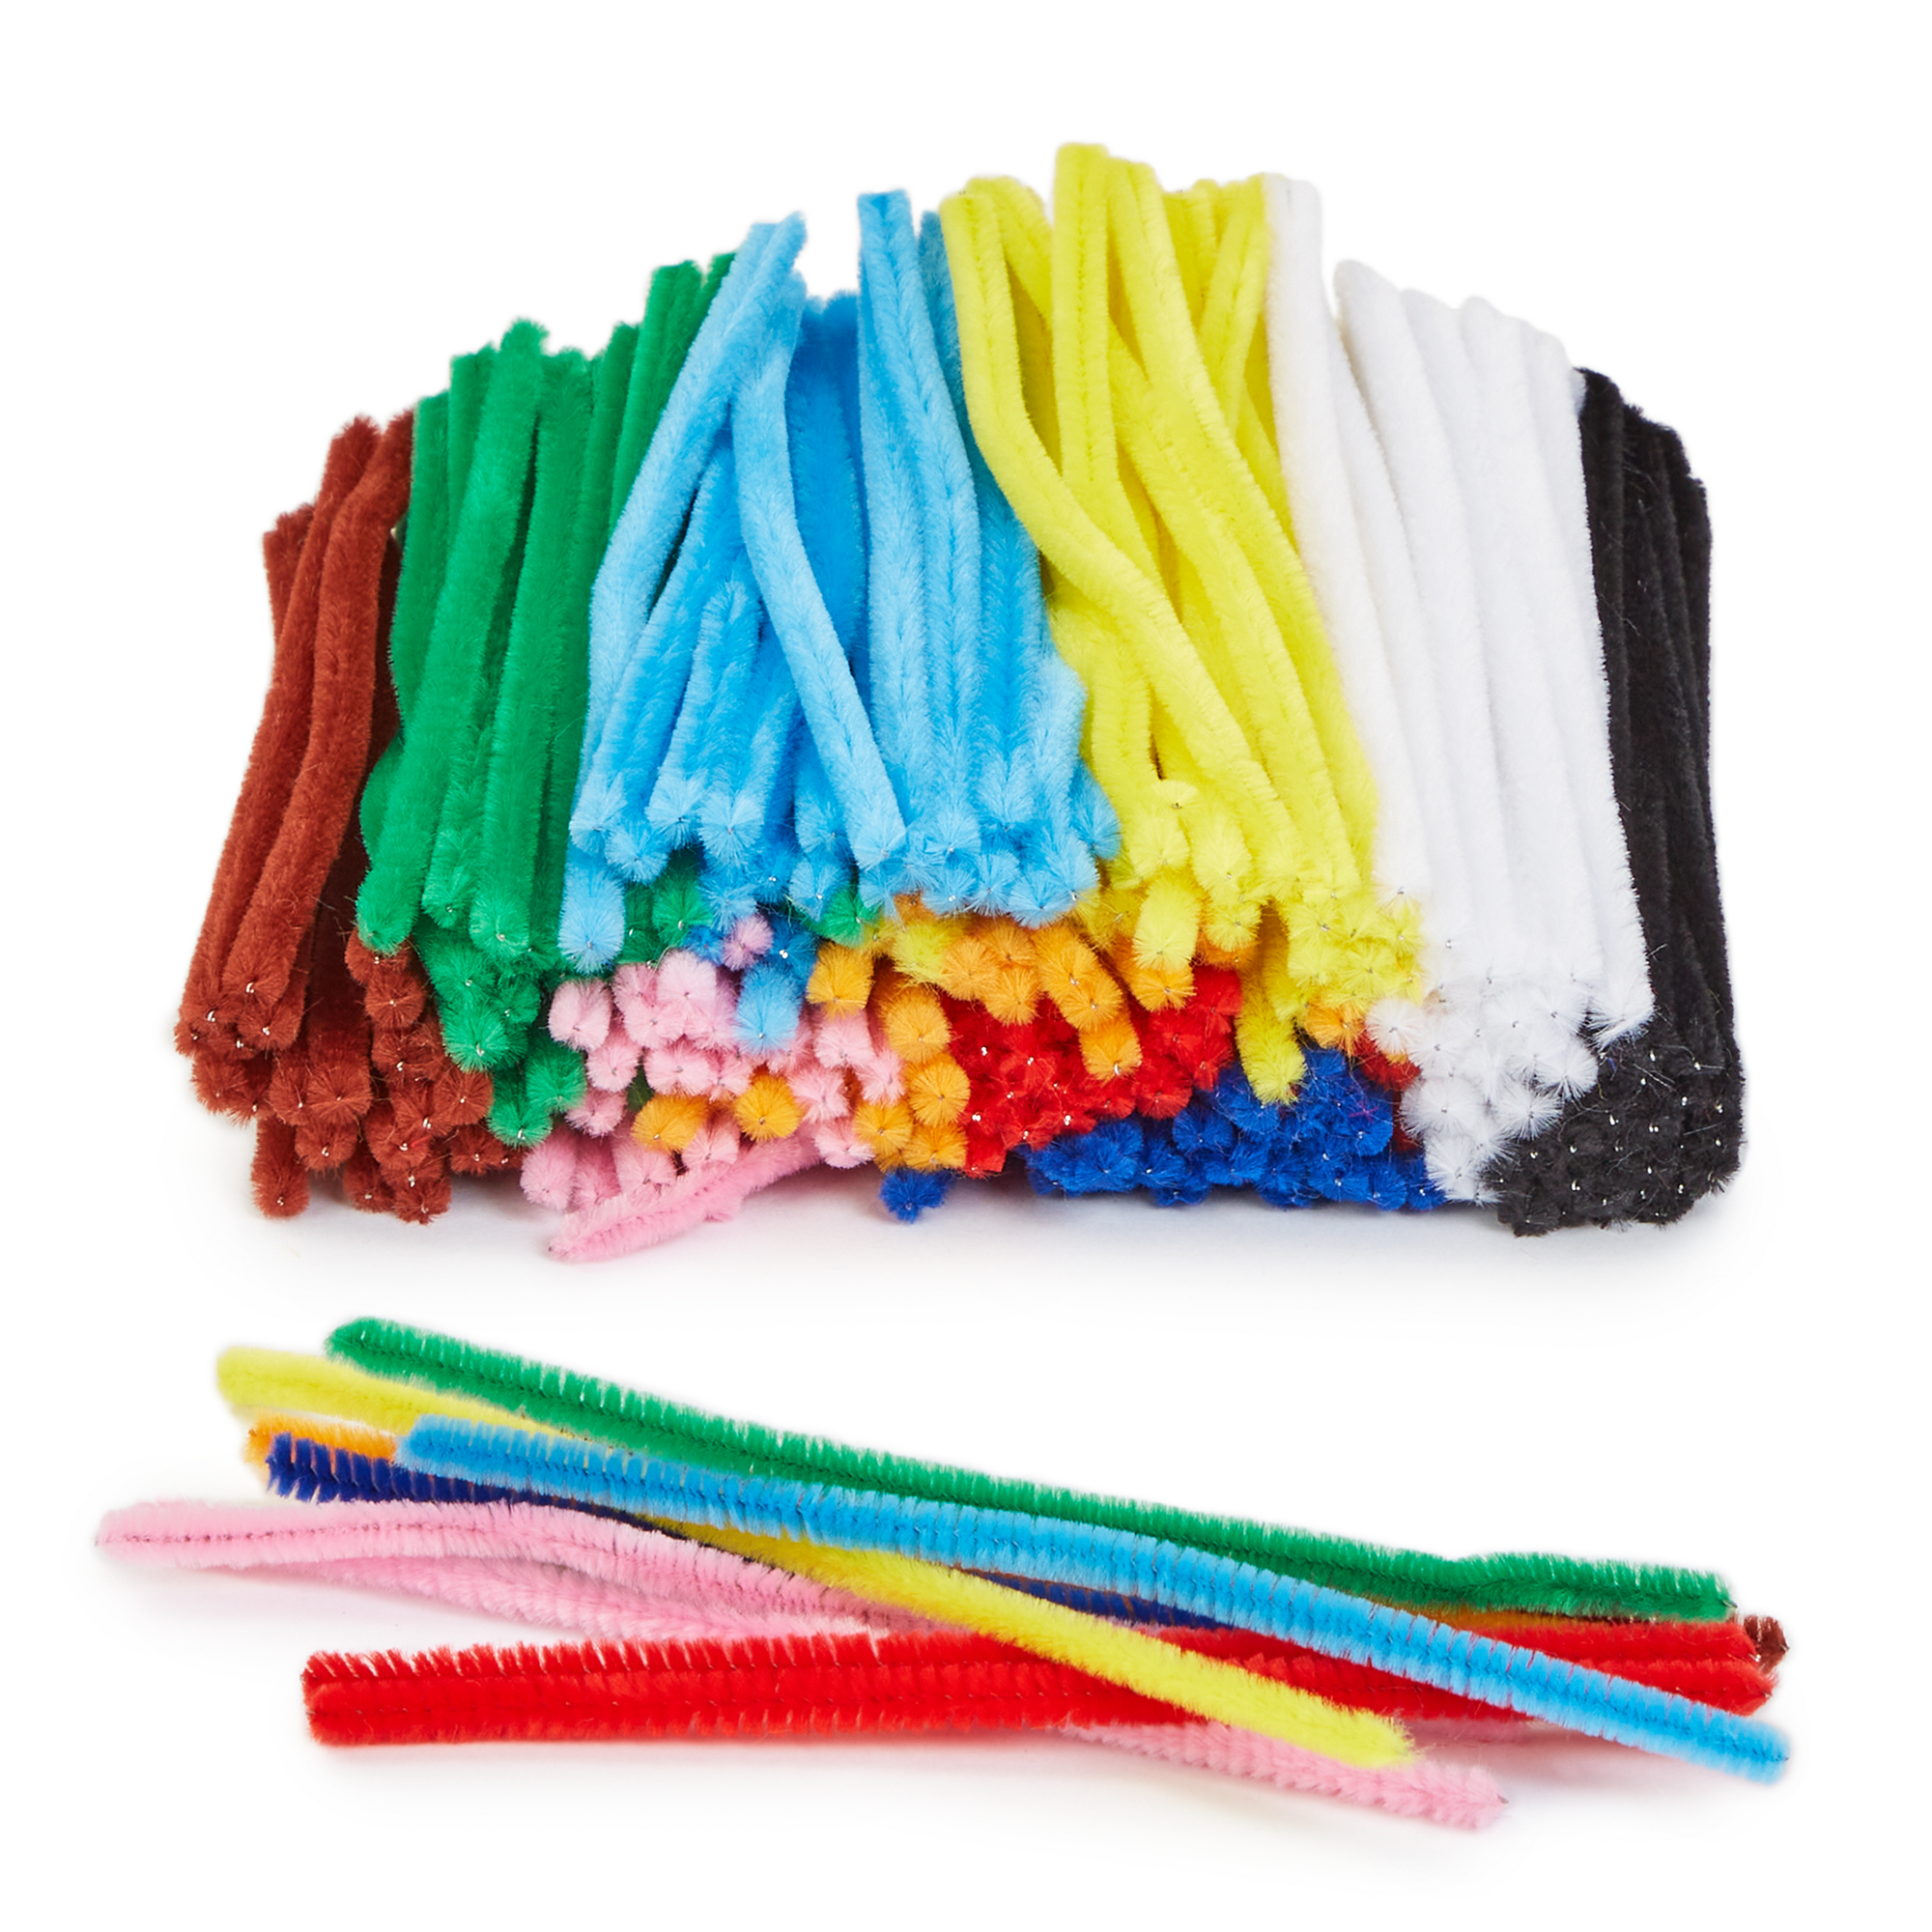 HC157540 - Classmates Craft Pipe Cleaners - 150mm - Pack of 250